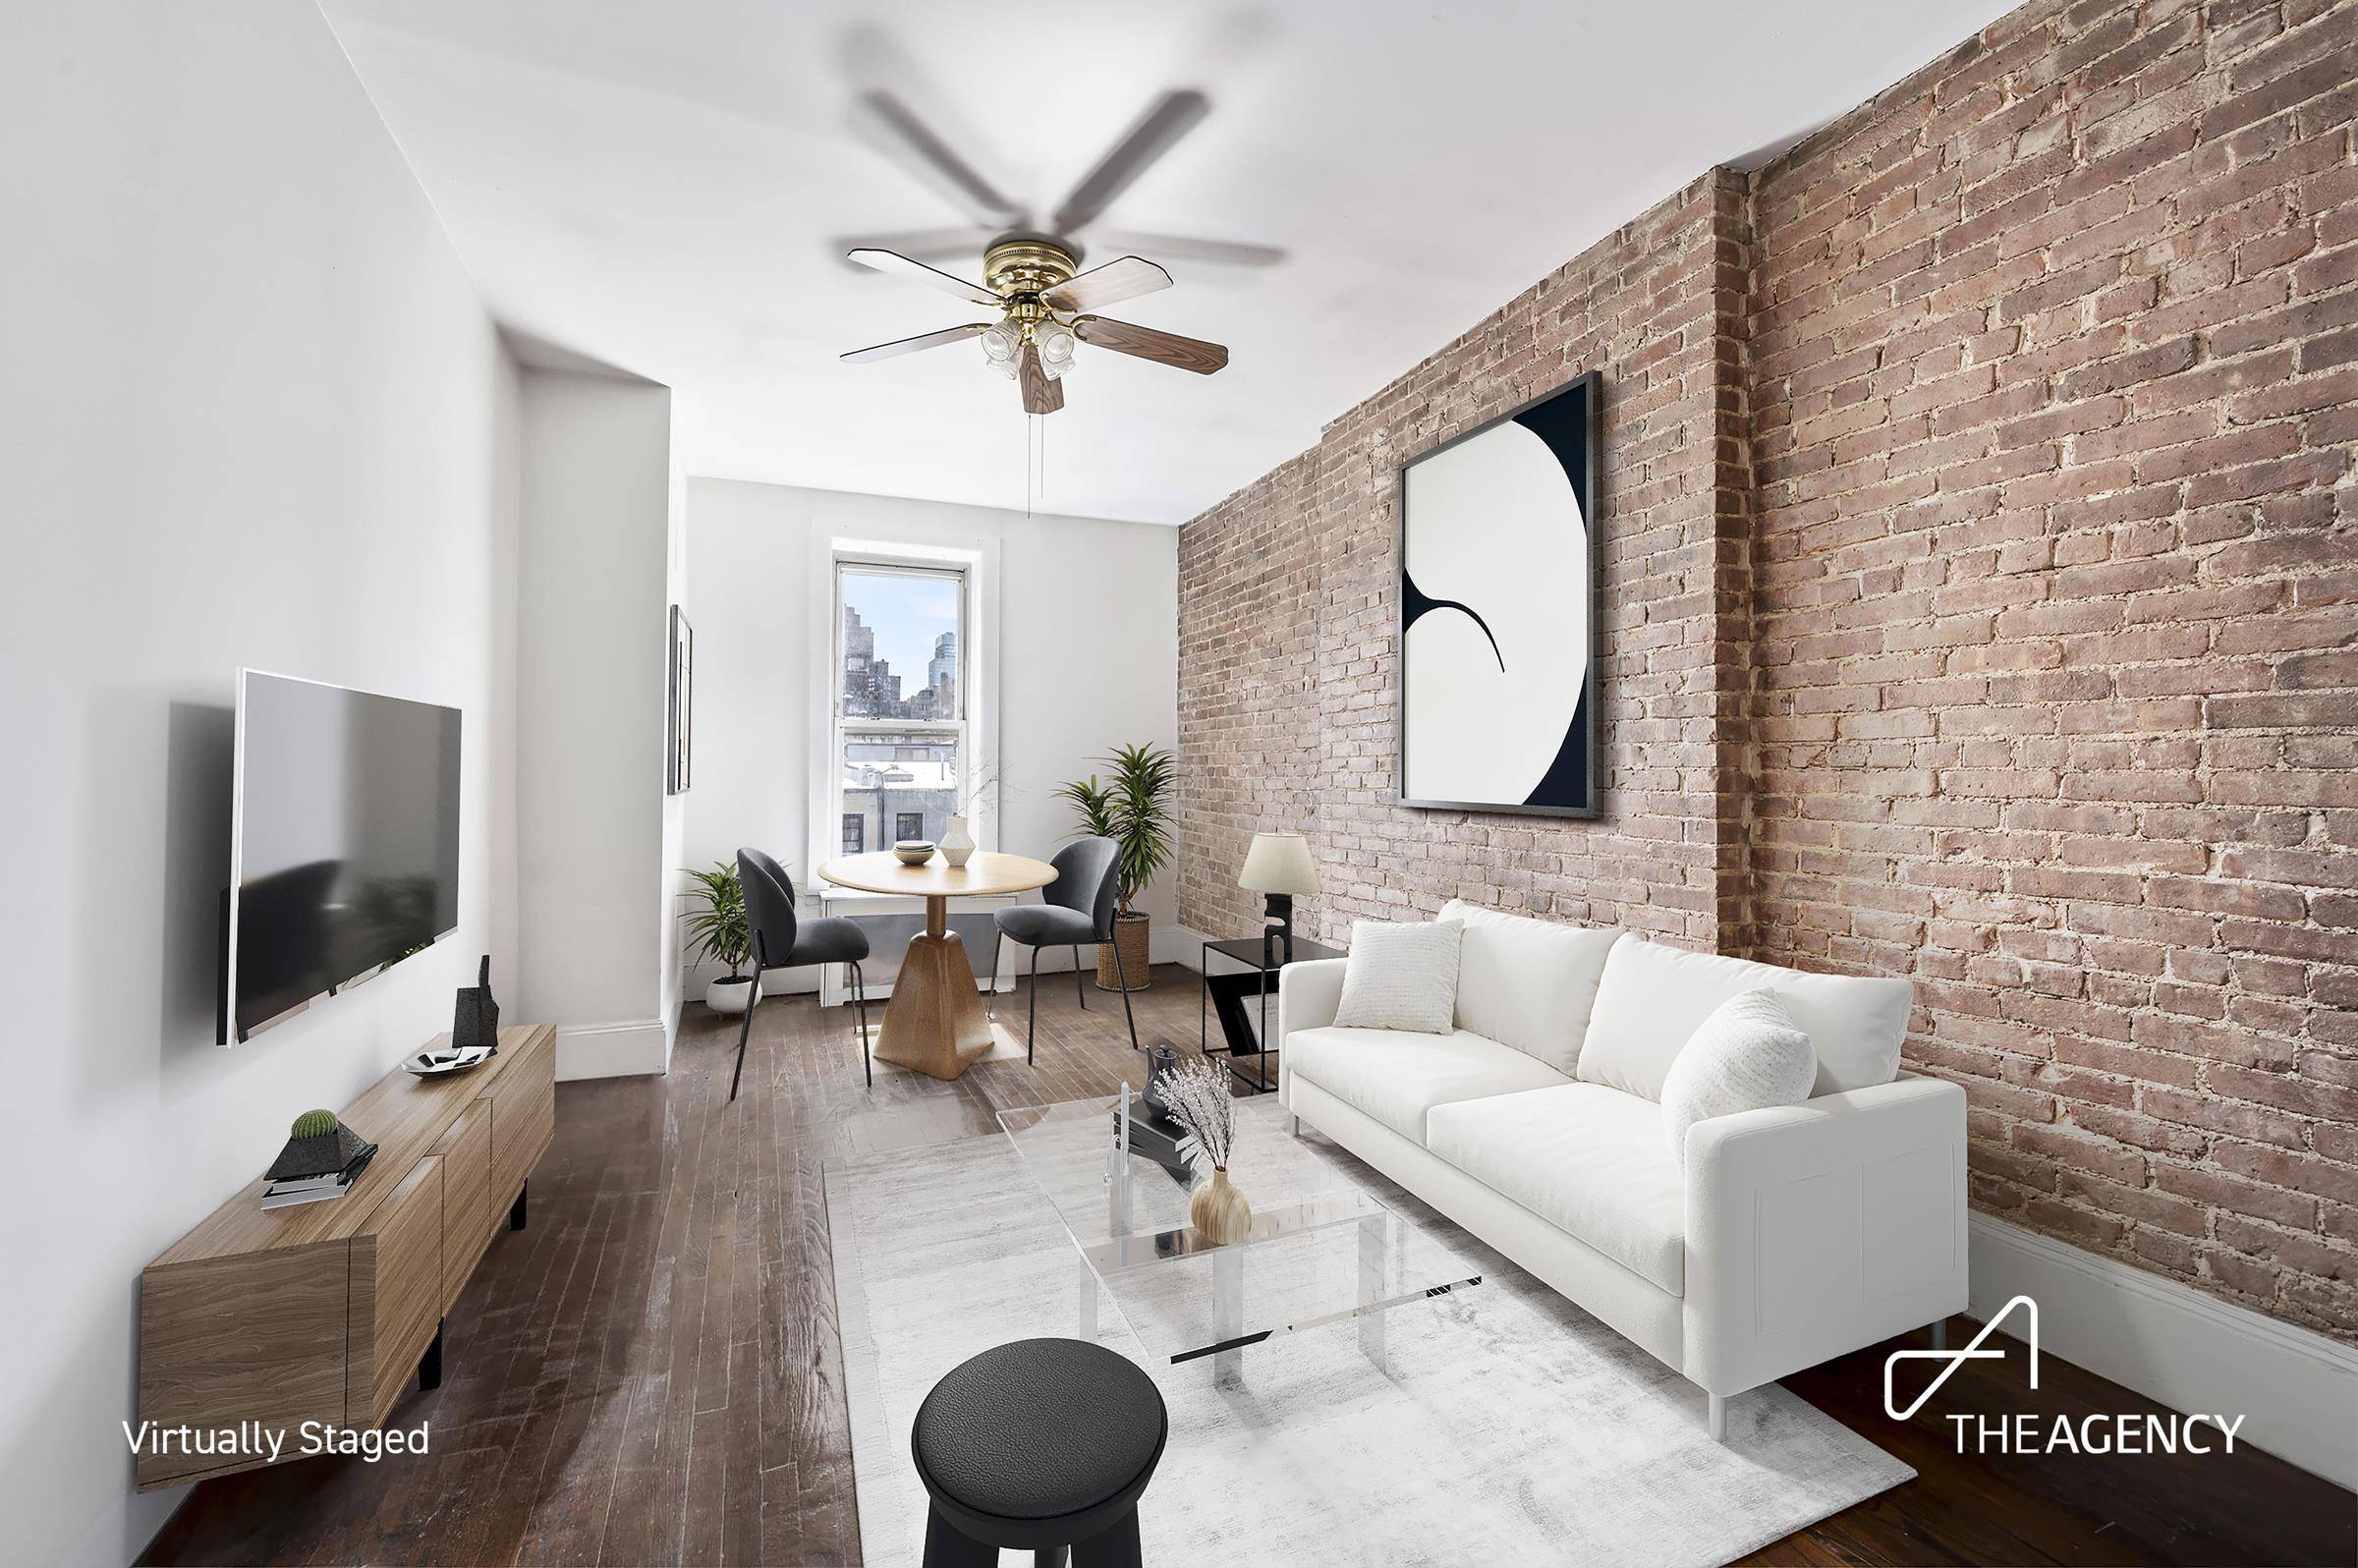 Welcome to 154 West 77th Street 4R, where the charm of the past meets future possibilities.